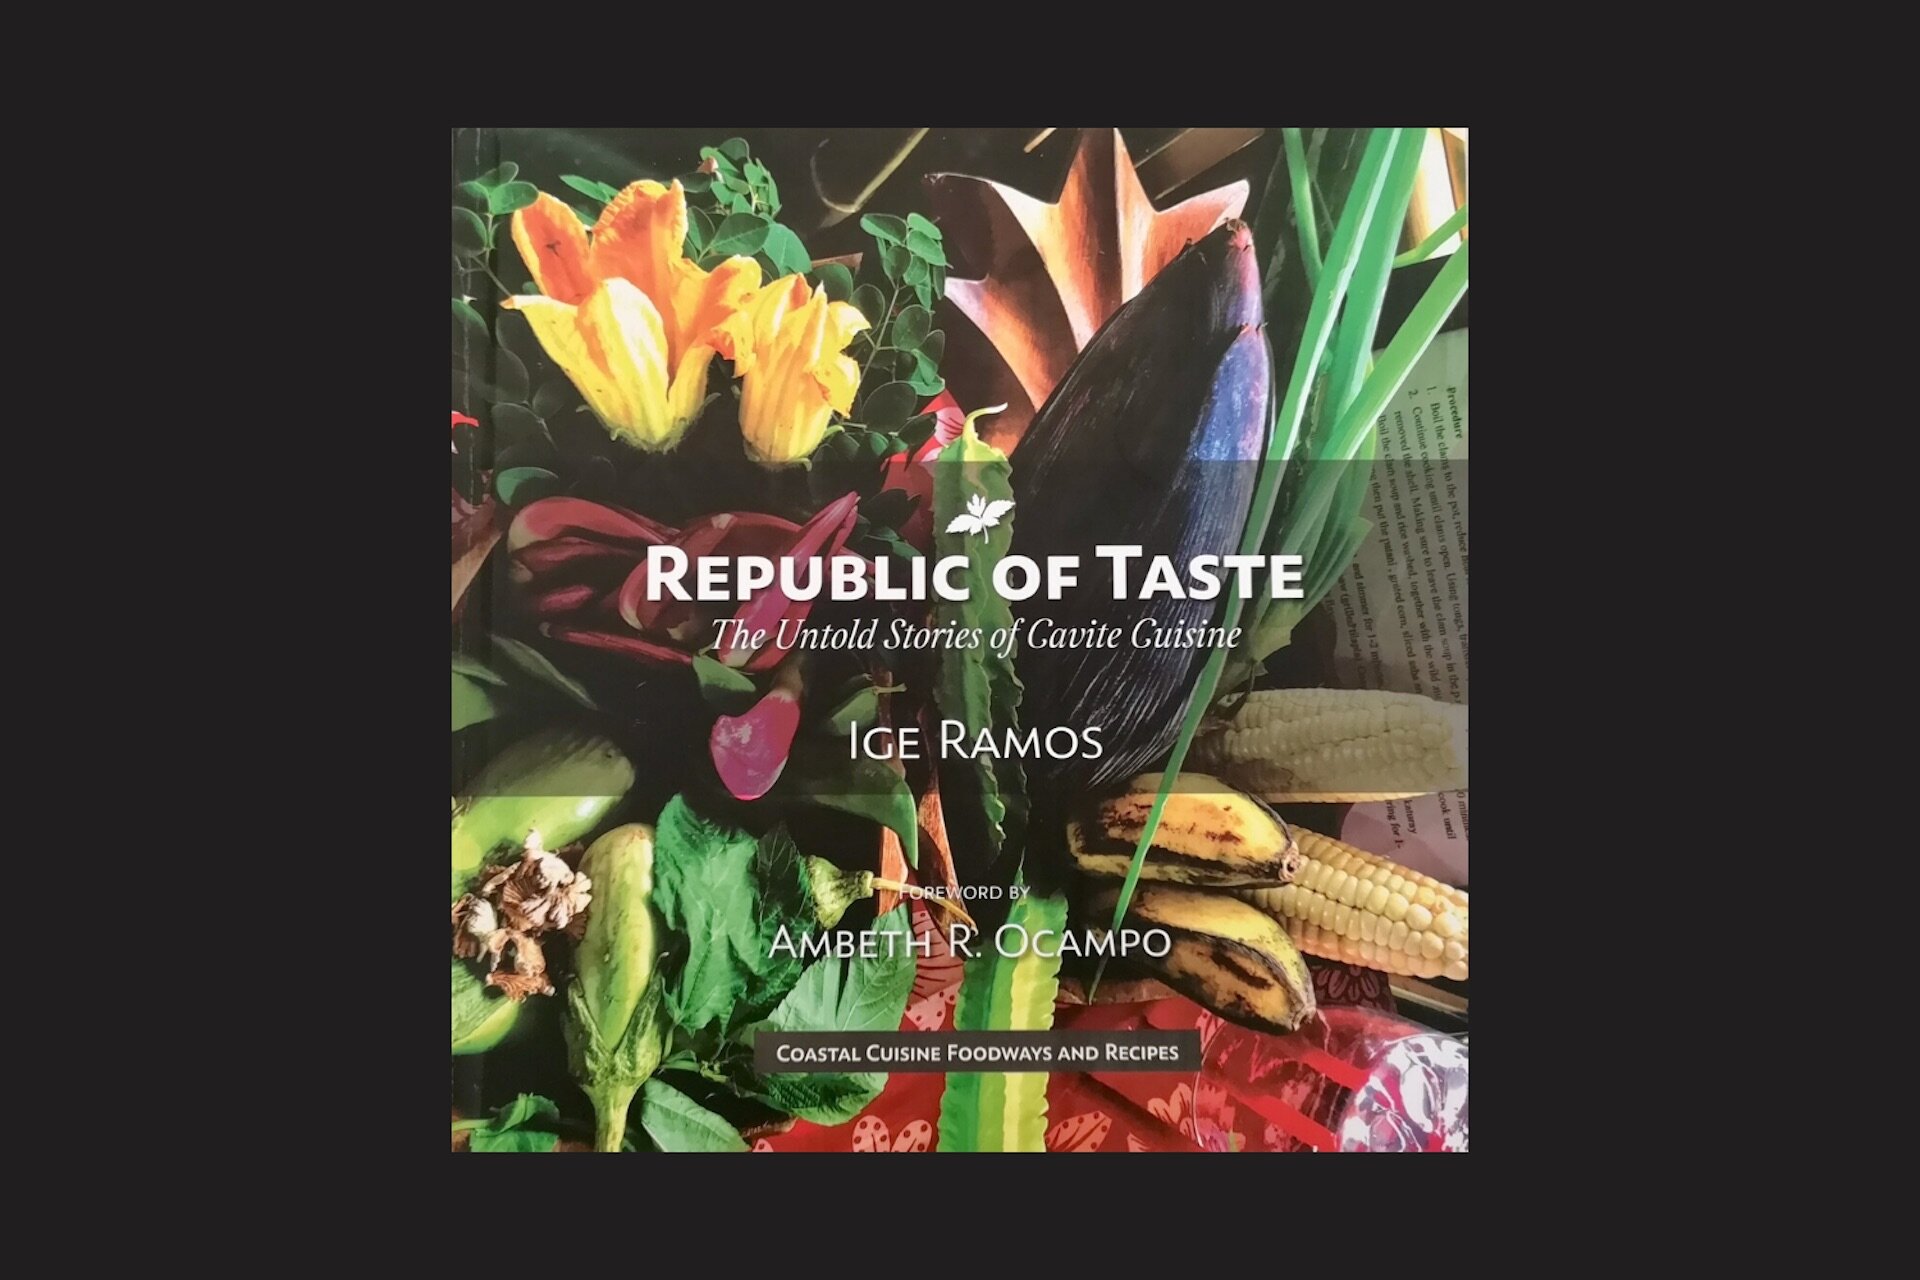 Republic of Taste: The Untold Stories of Cavite Cuisine by Ige Ramos